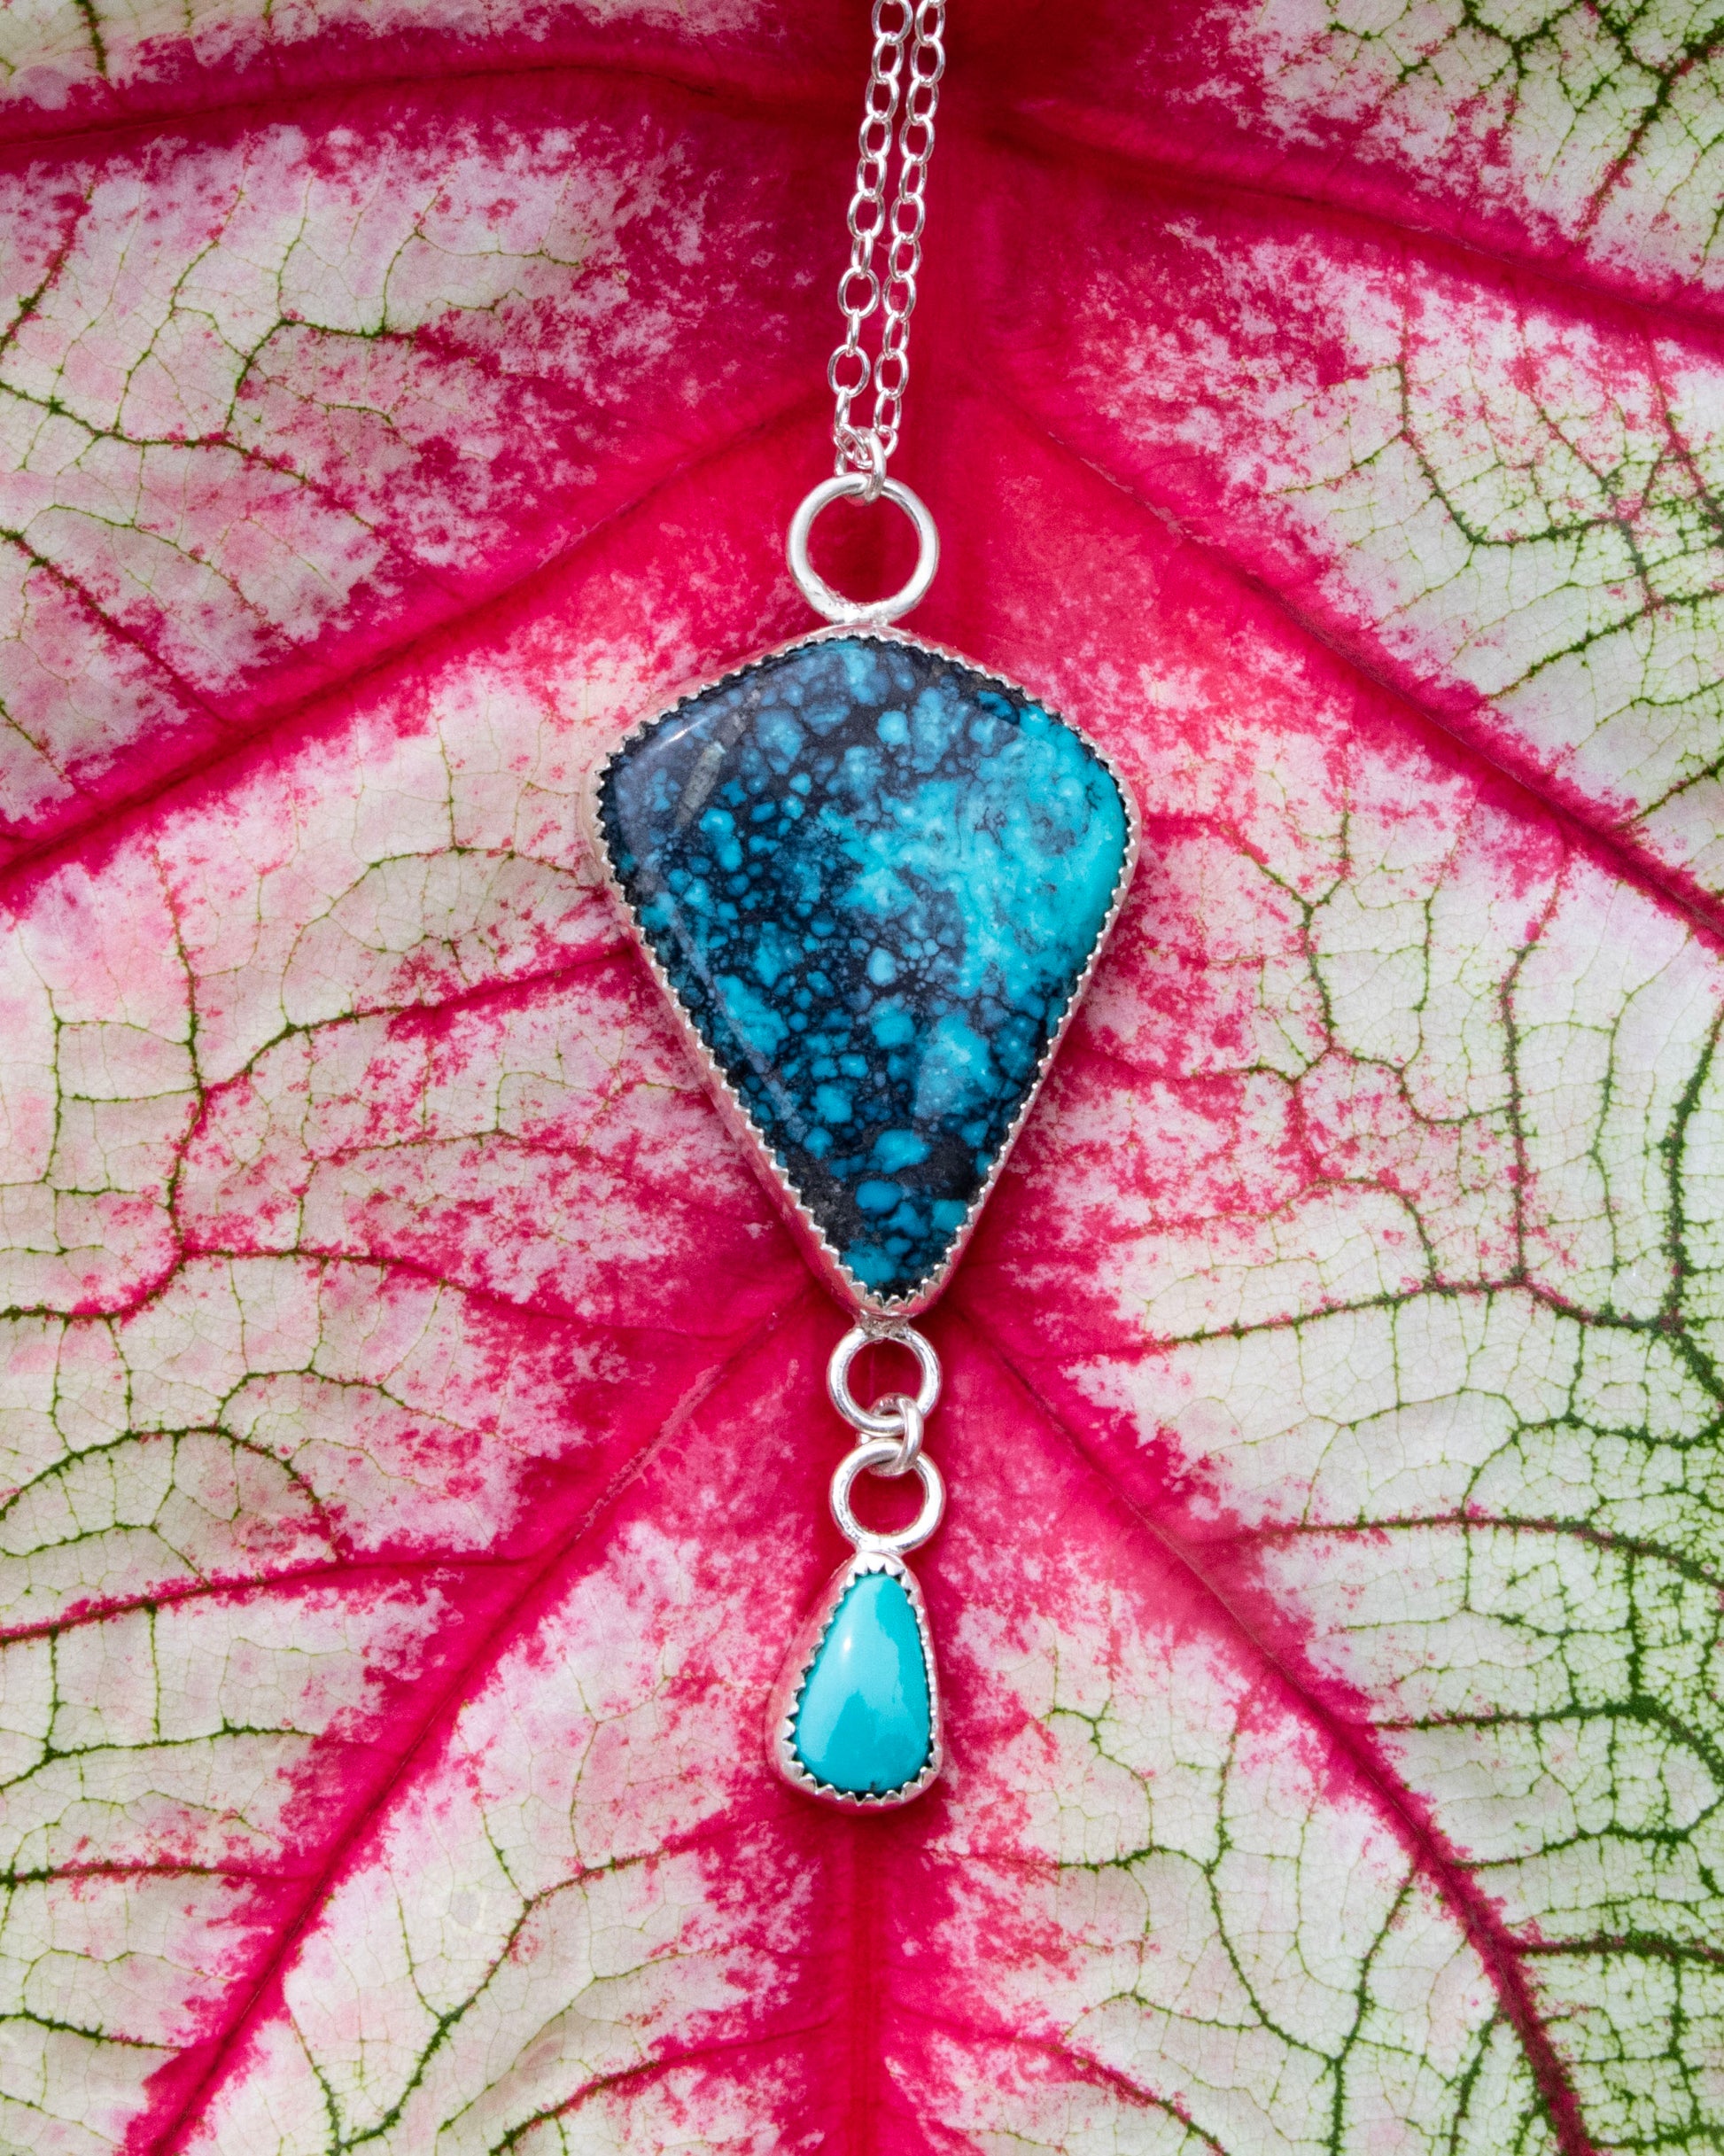 Moon River Turquoise kite sterling silver necklace with carico lake turquoise accent hung from a short jump ring chain at bottom of moon rivere stone. Necklace is sitting in front of red veins of white and green leaf 